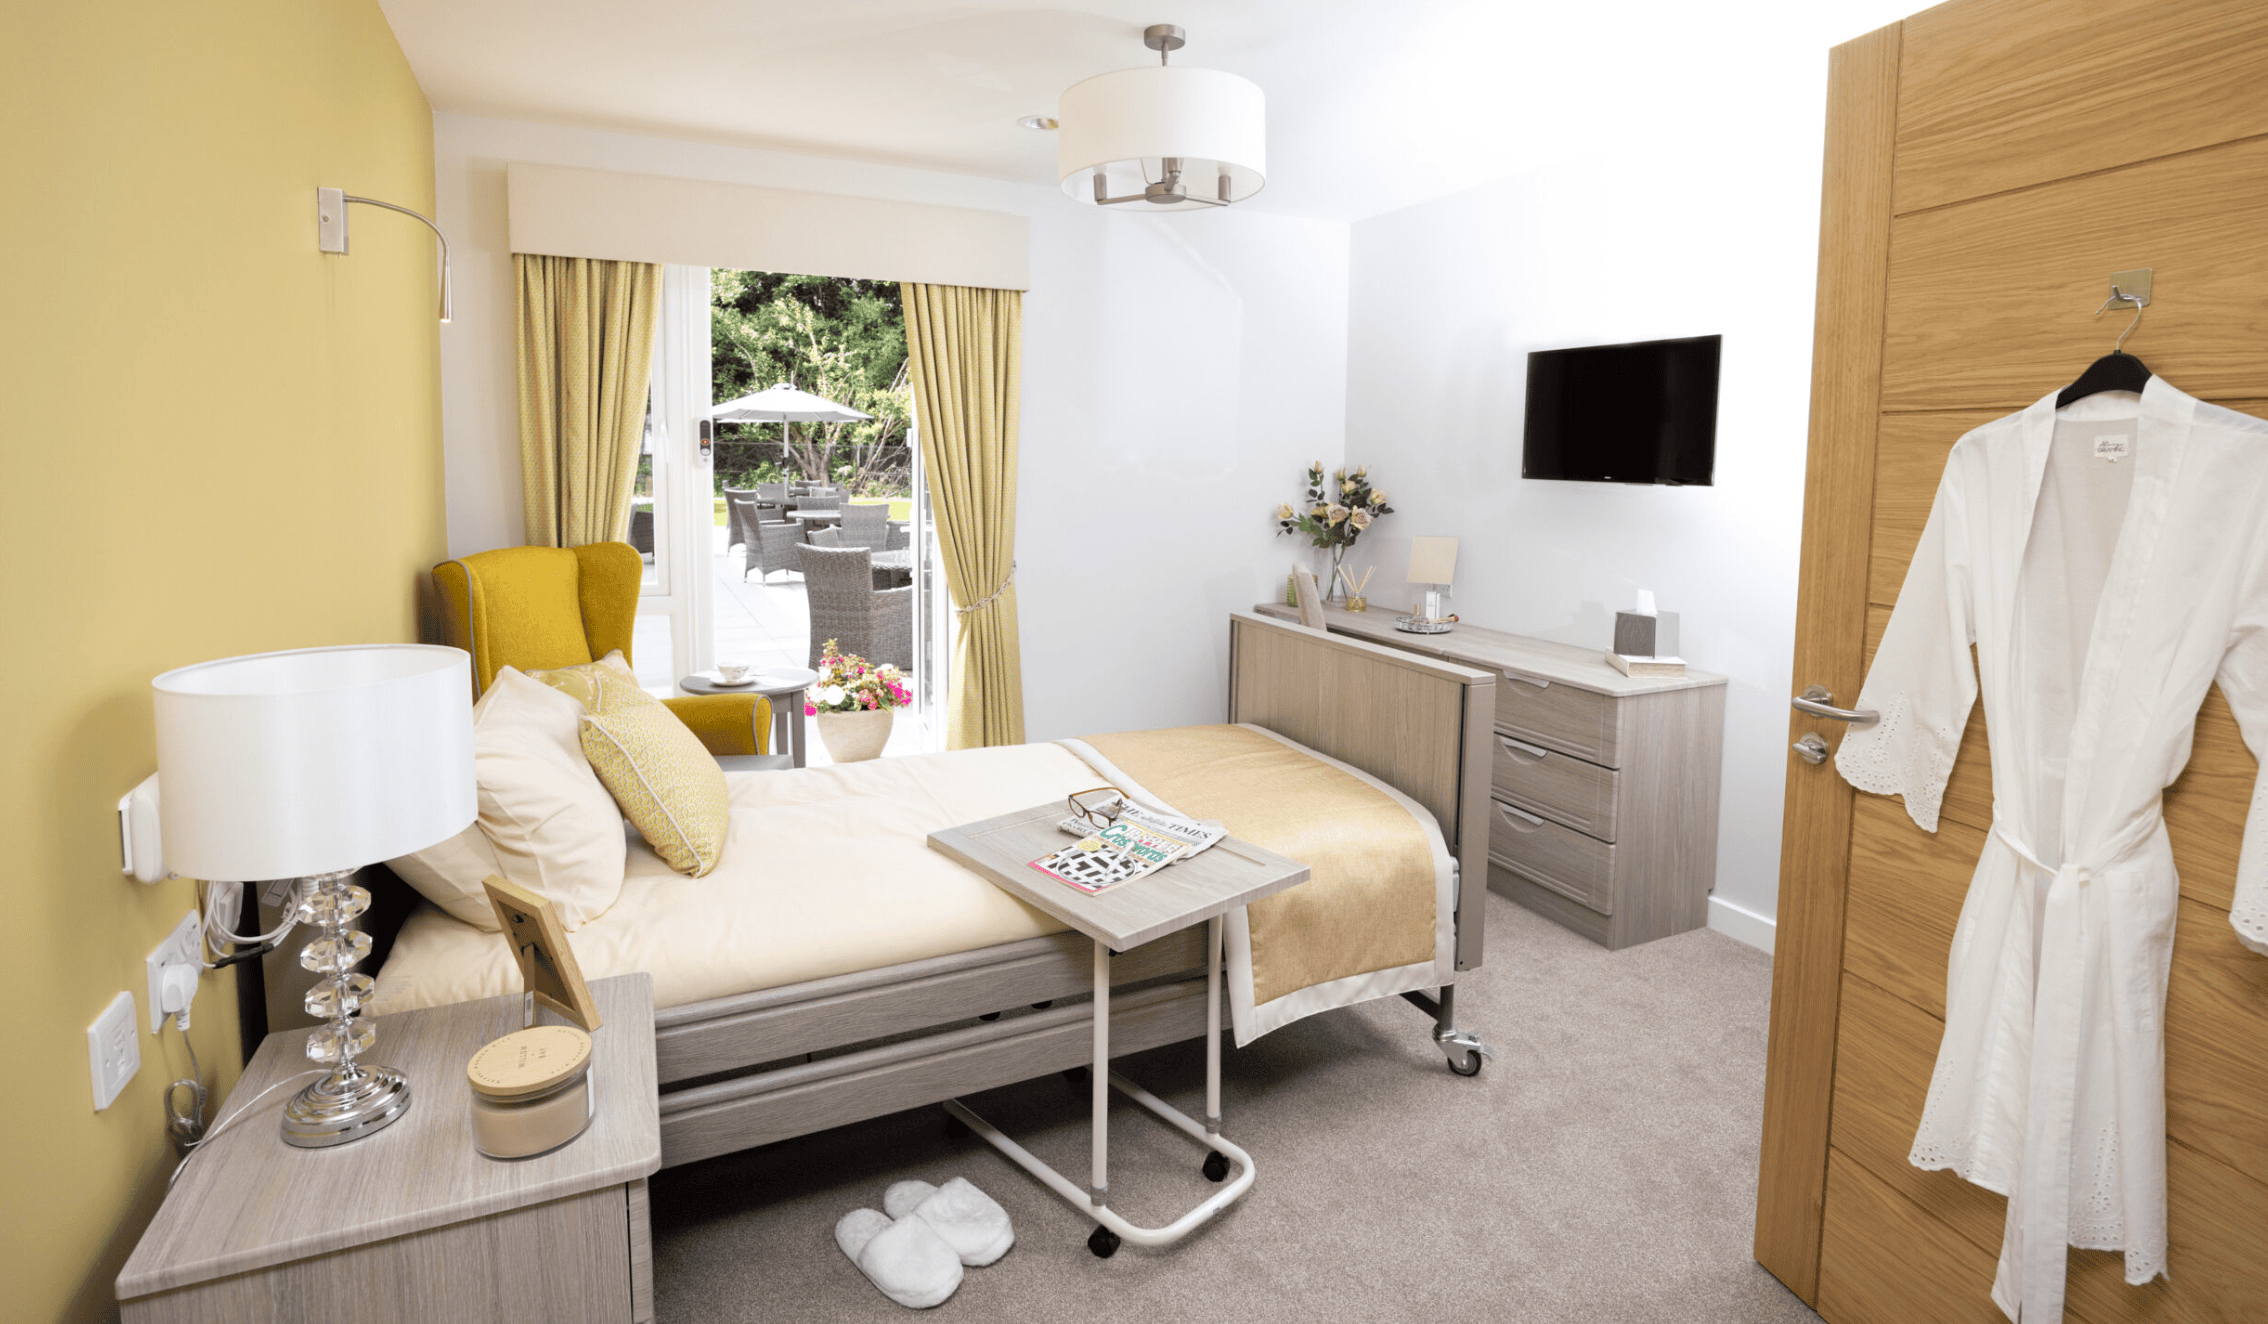 Bedroom of Mearns View care home in Glasgow, Scotland